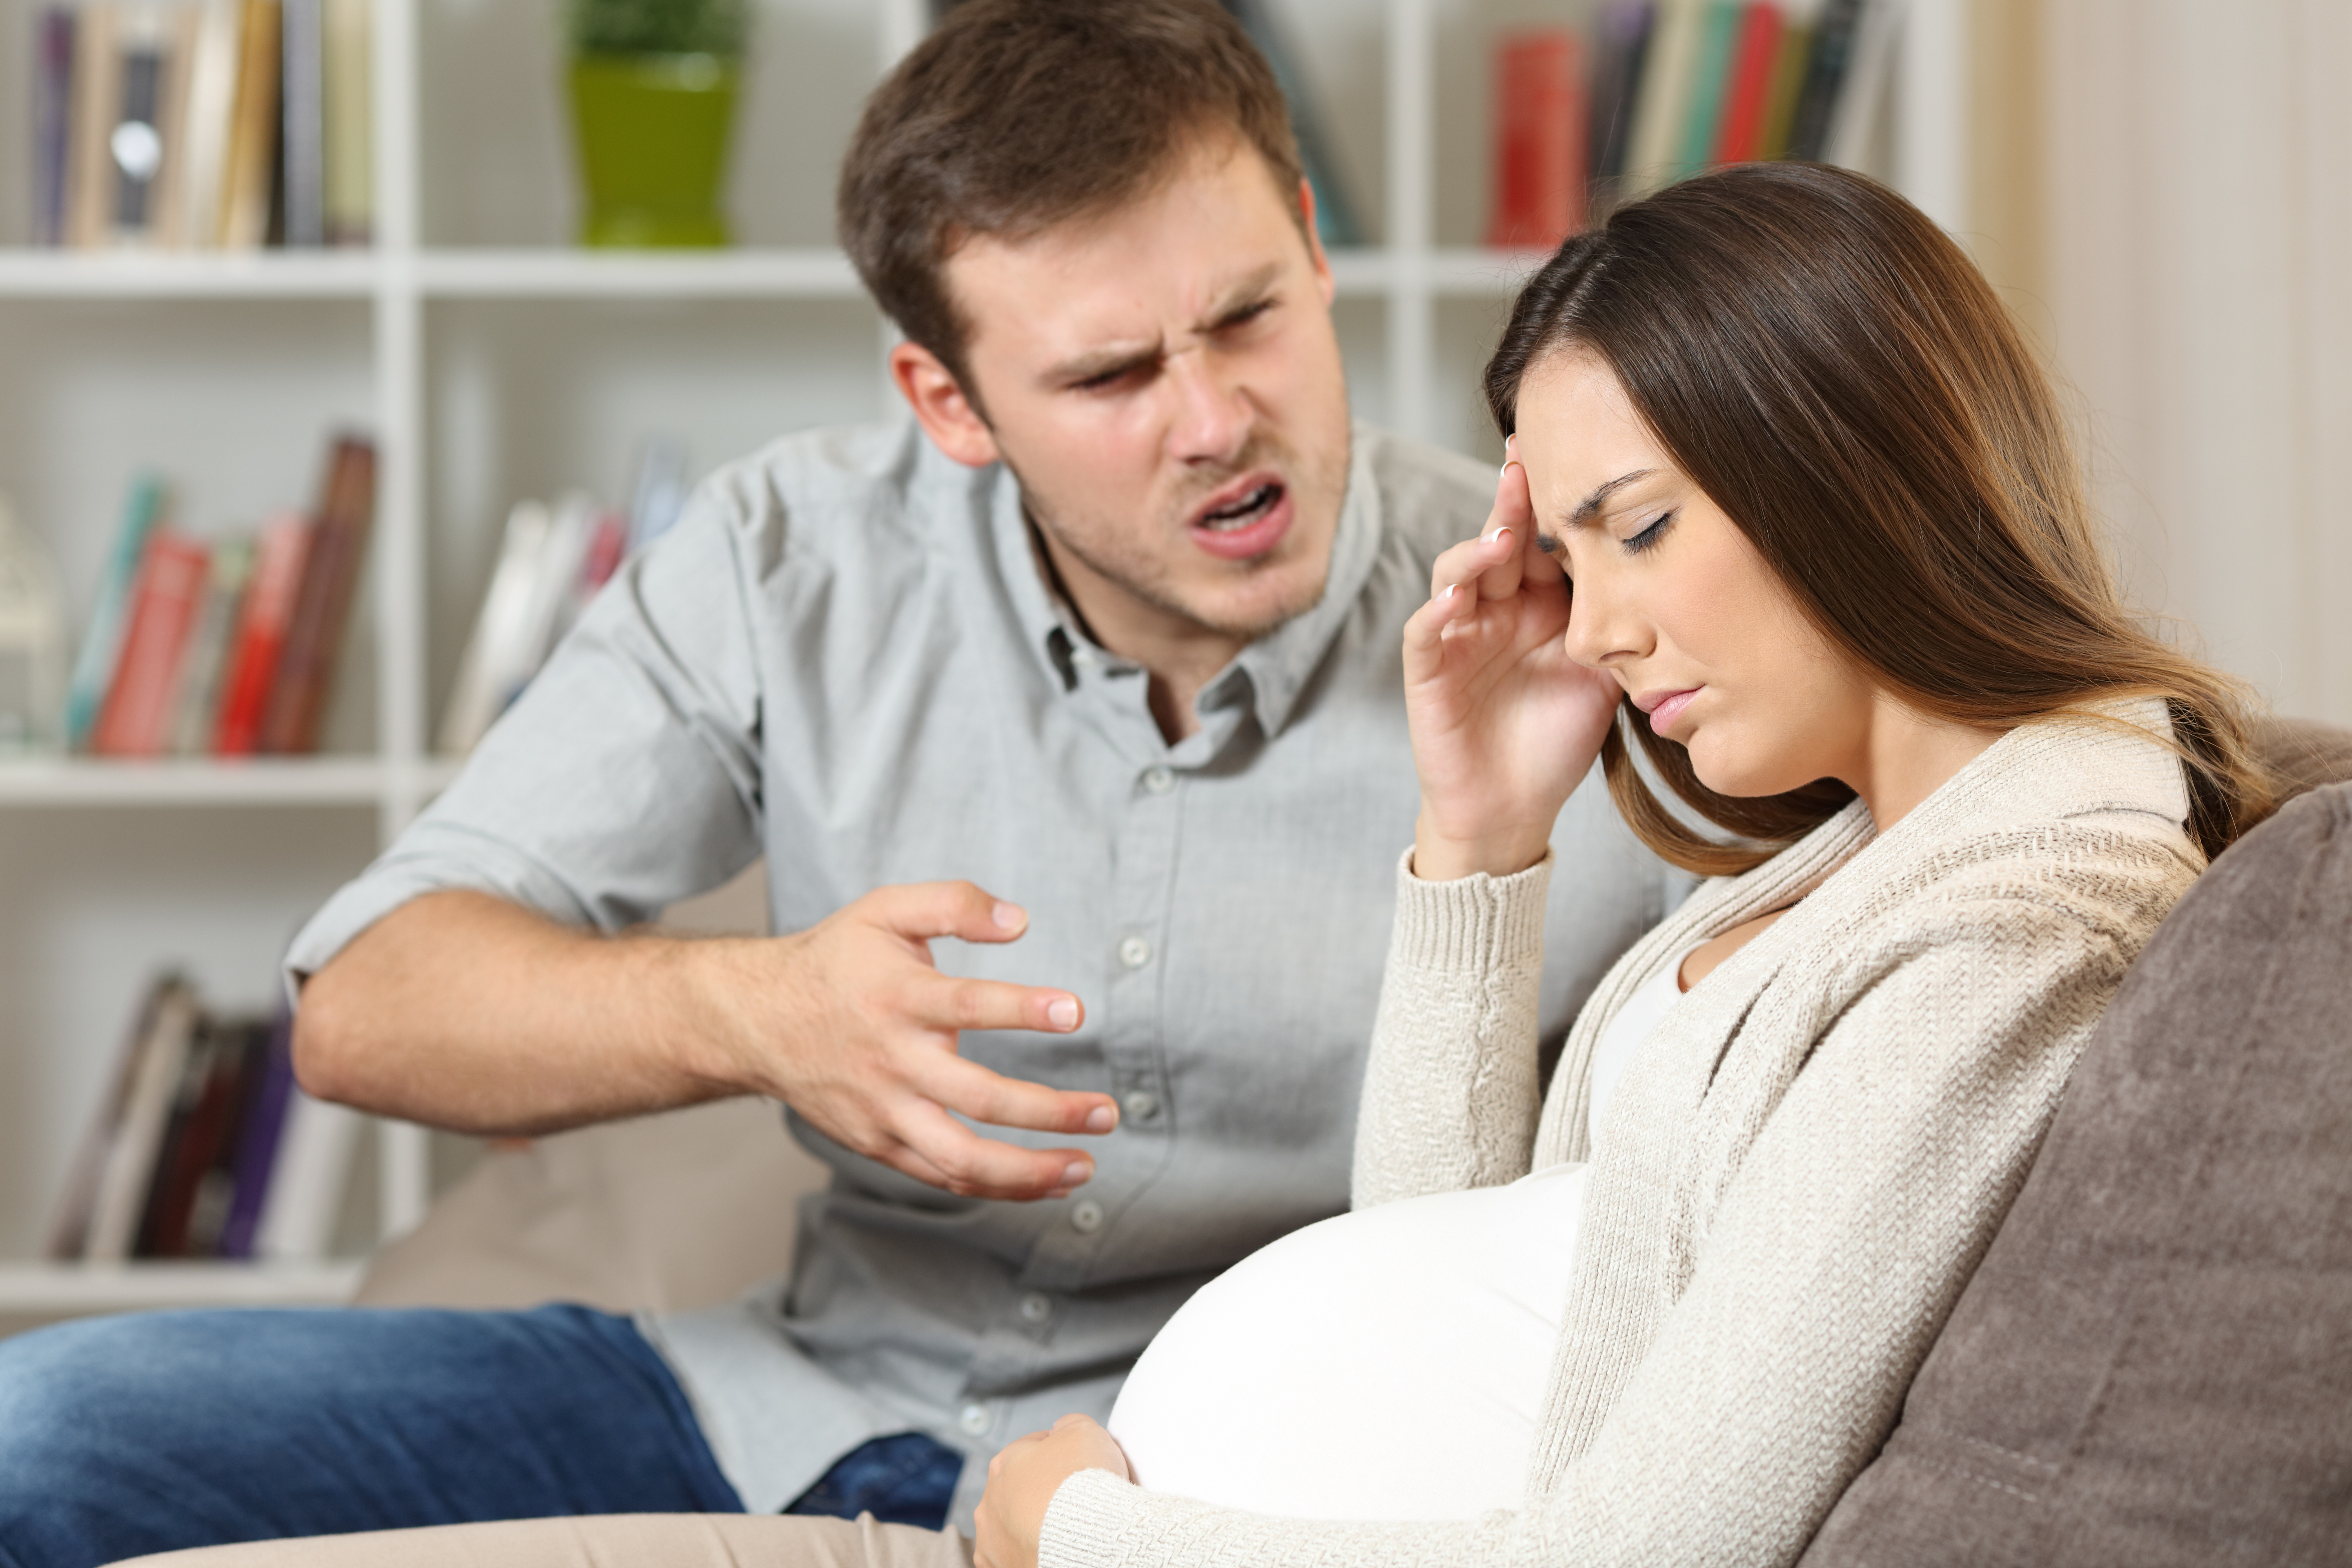 Man arguing with his sad pregnant wife | Source: Shutterstock